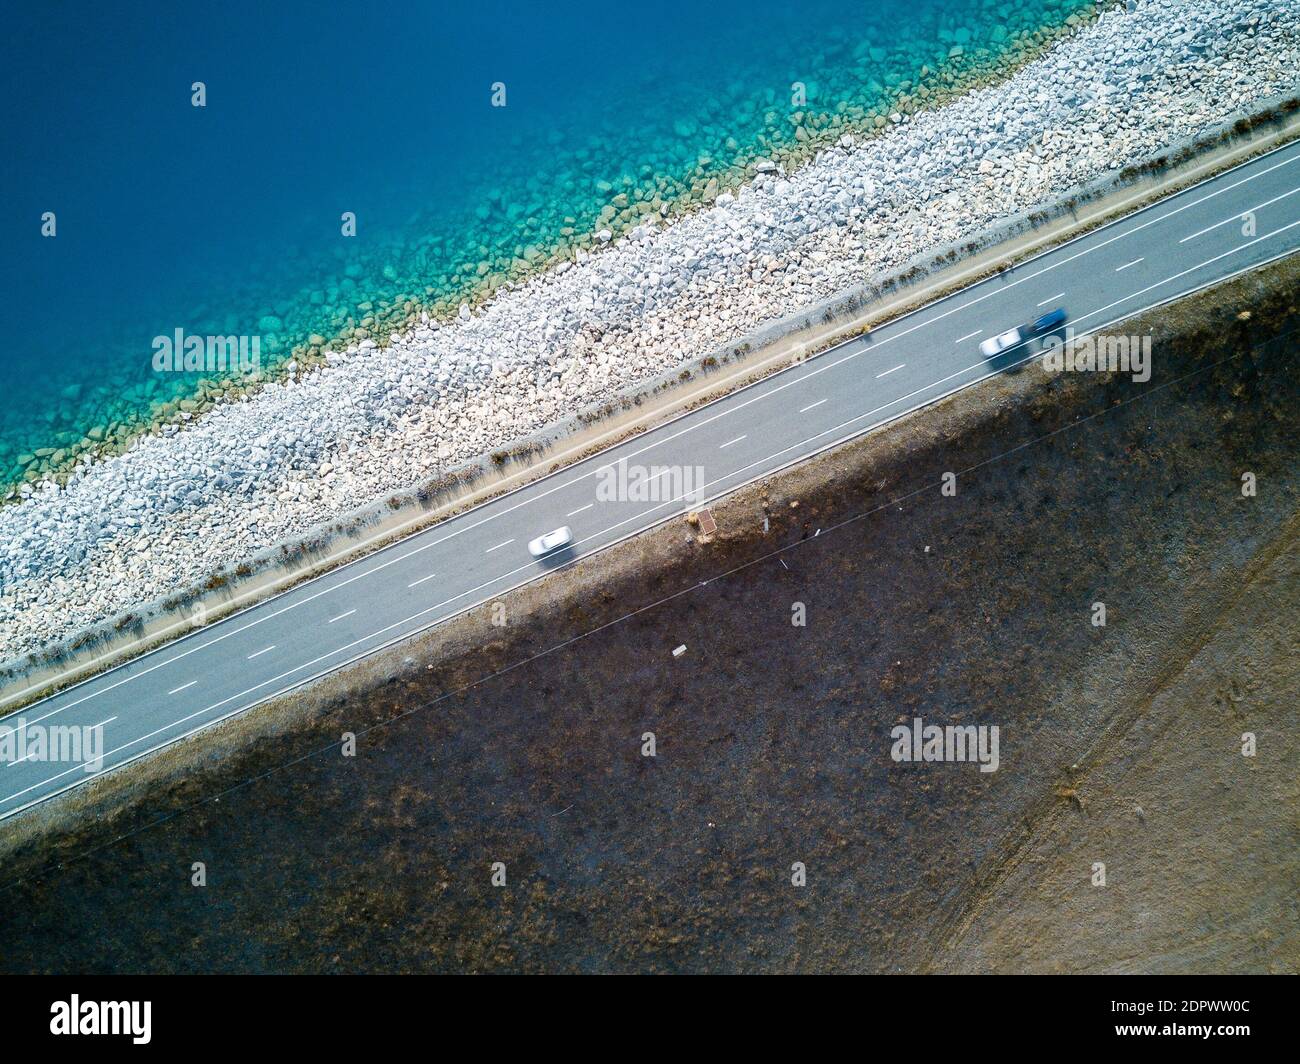 Aerial View Of Cars On Road By Sea Stock Photo